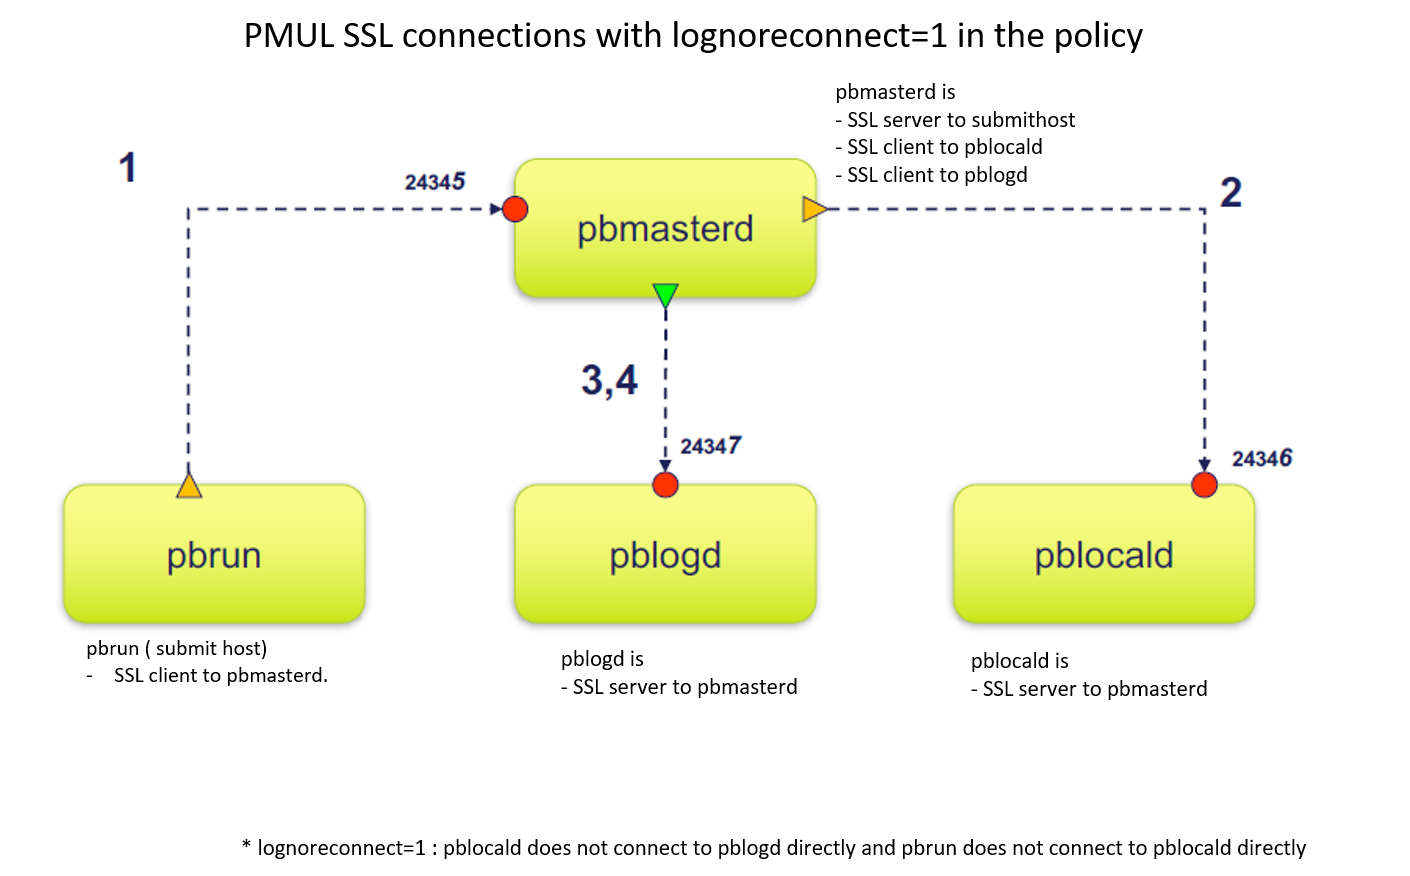 PMUL SSL connections with lognoreconnect=1 in the policy